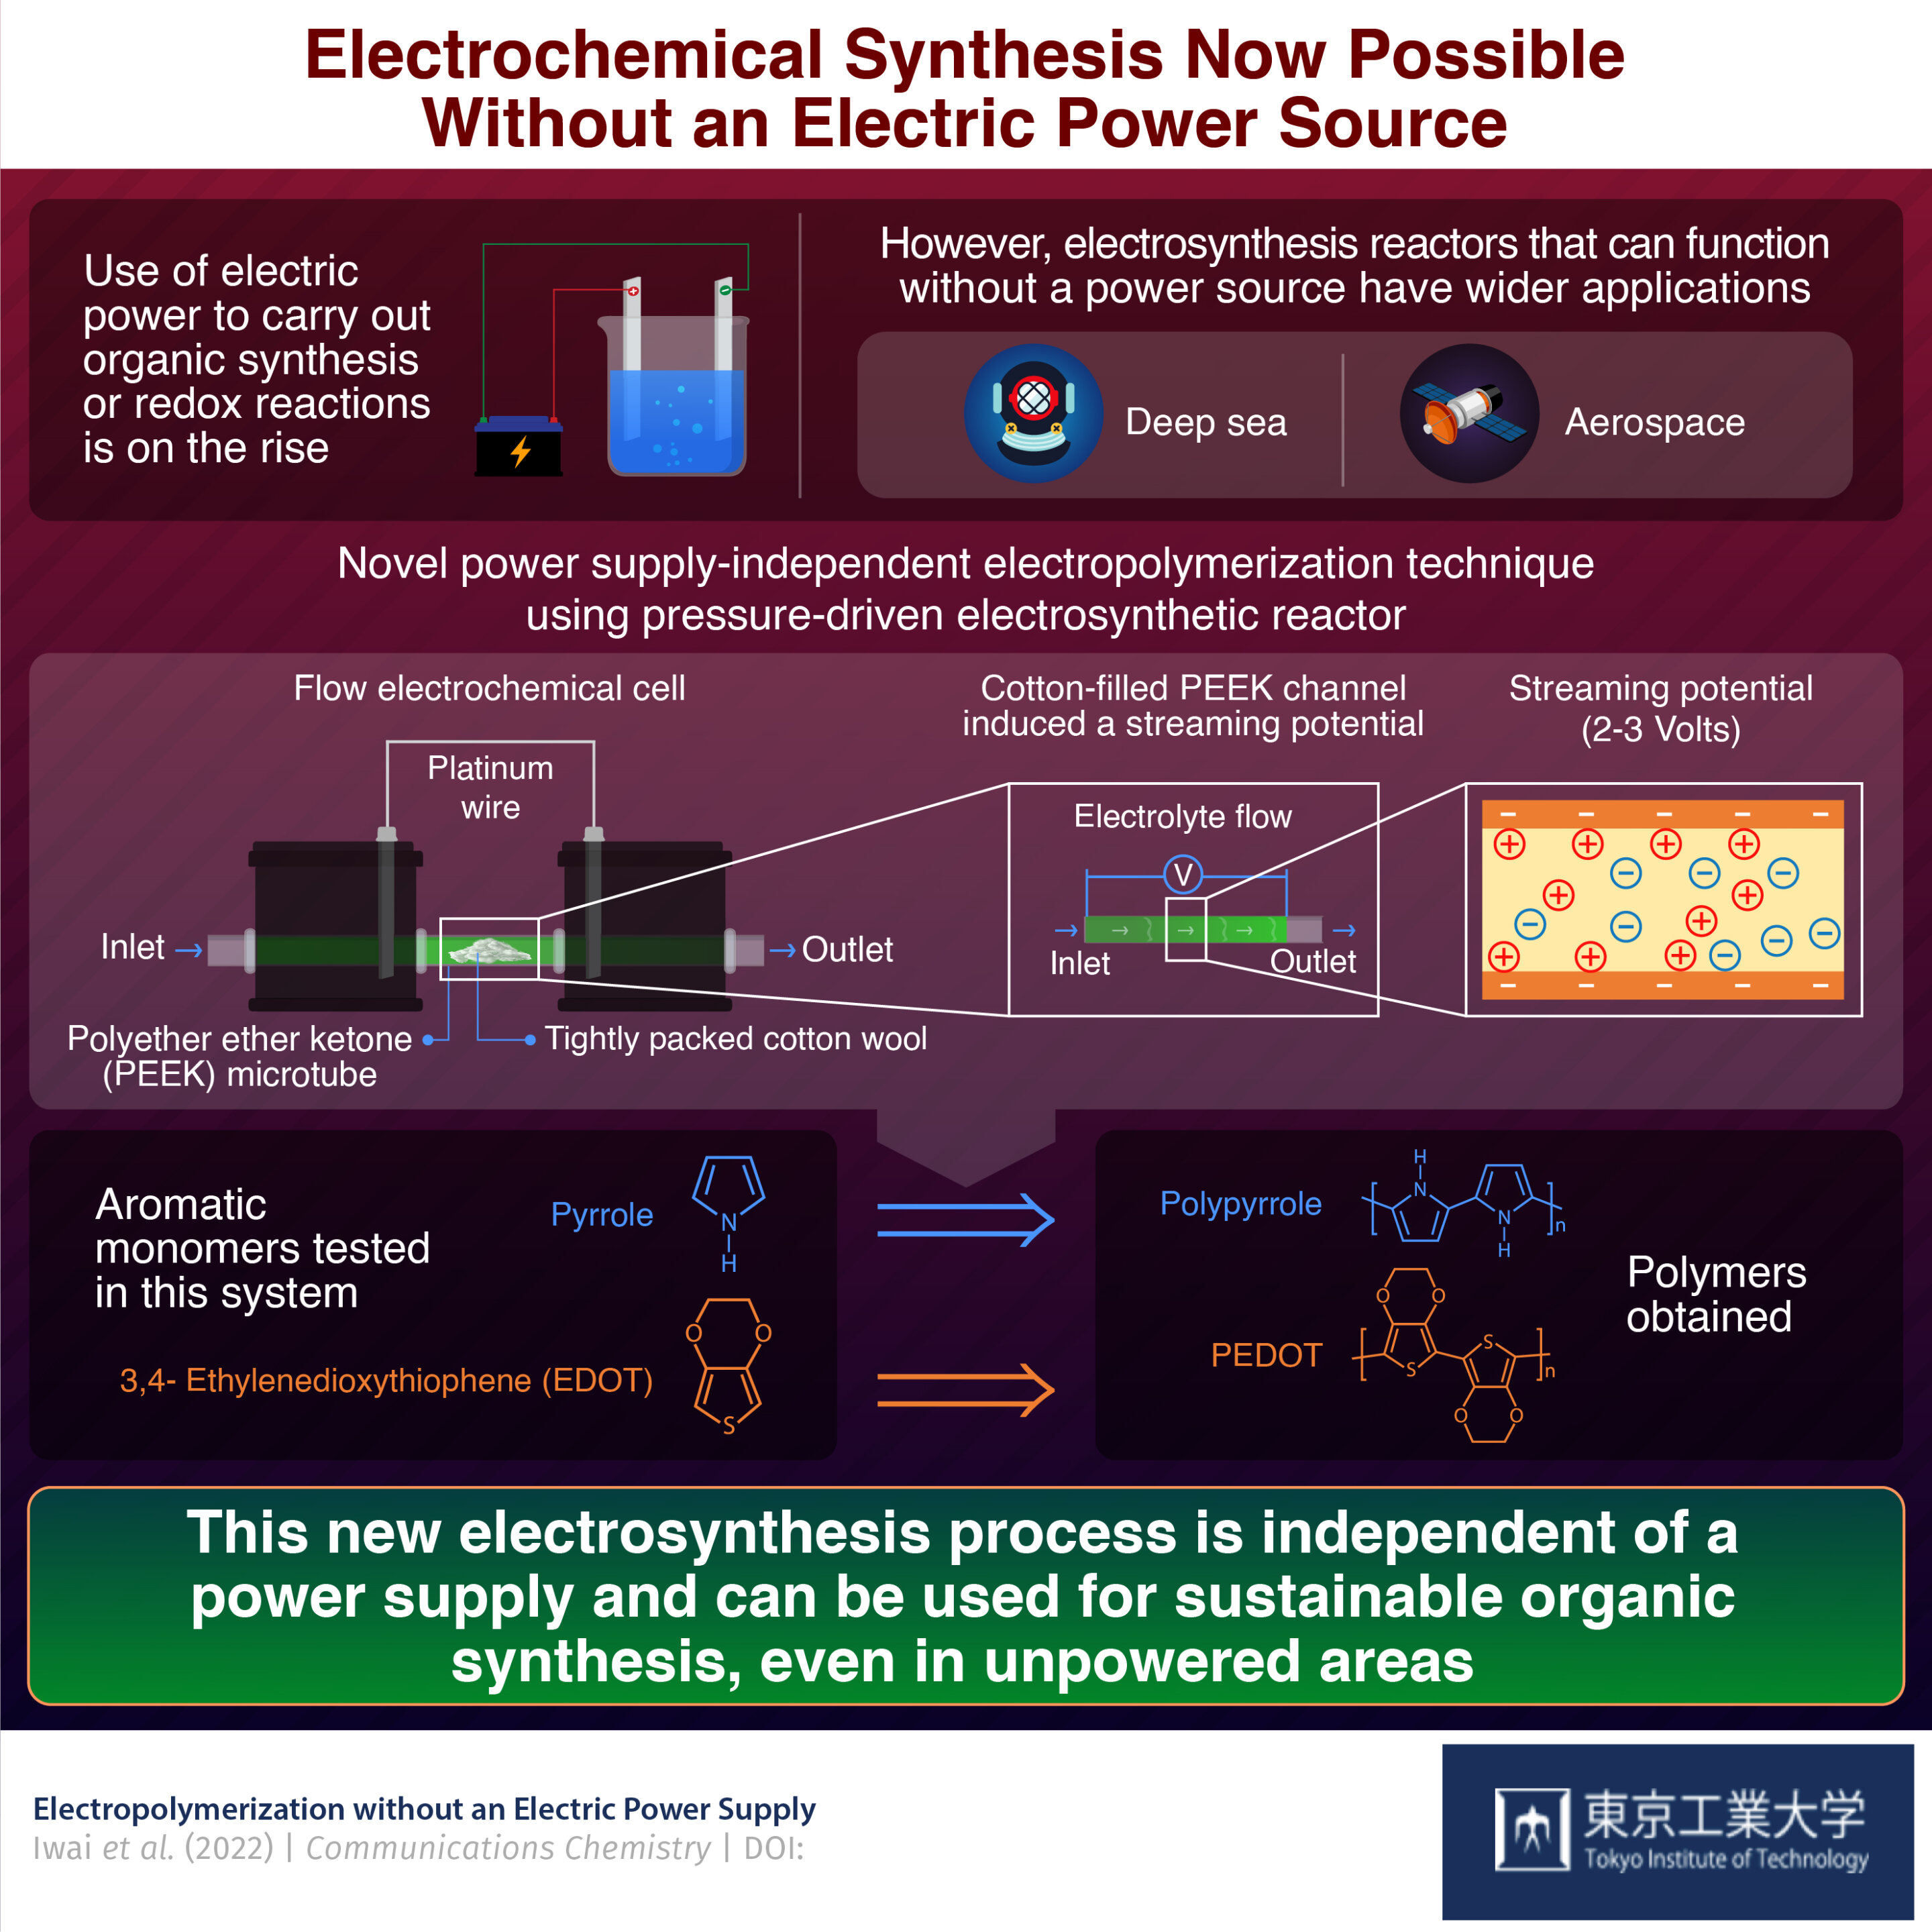 Electrochemical synthesis now possible without electric power source